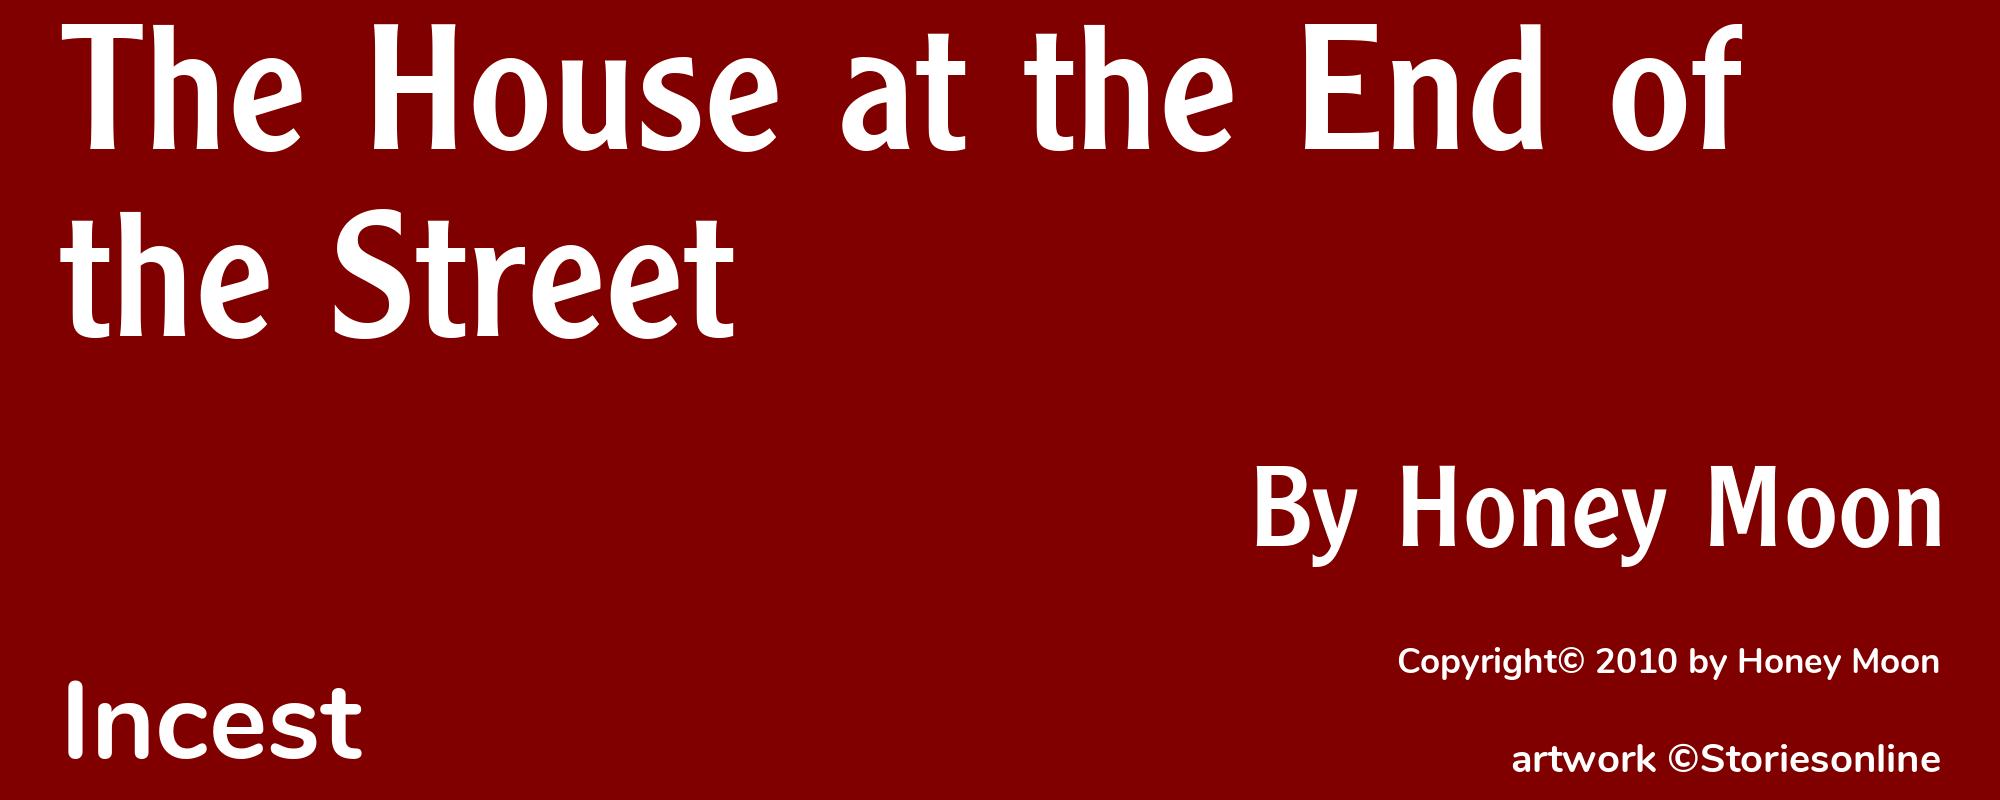 The House at the End of the Street - Cover